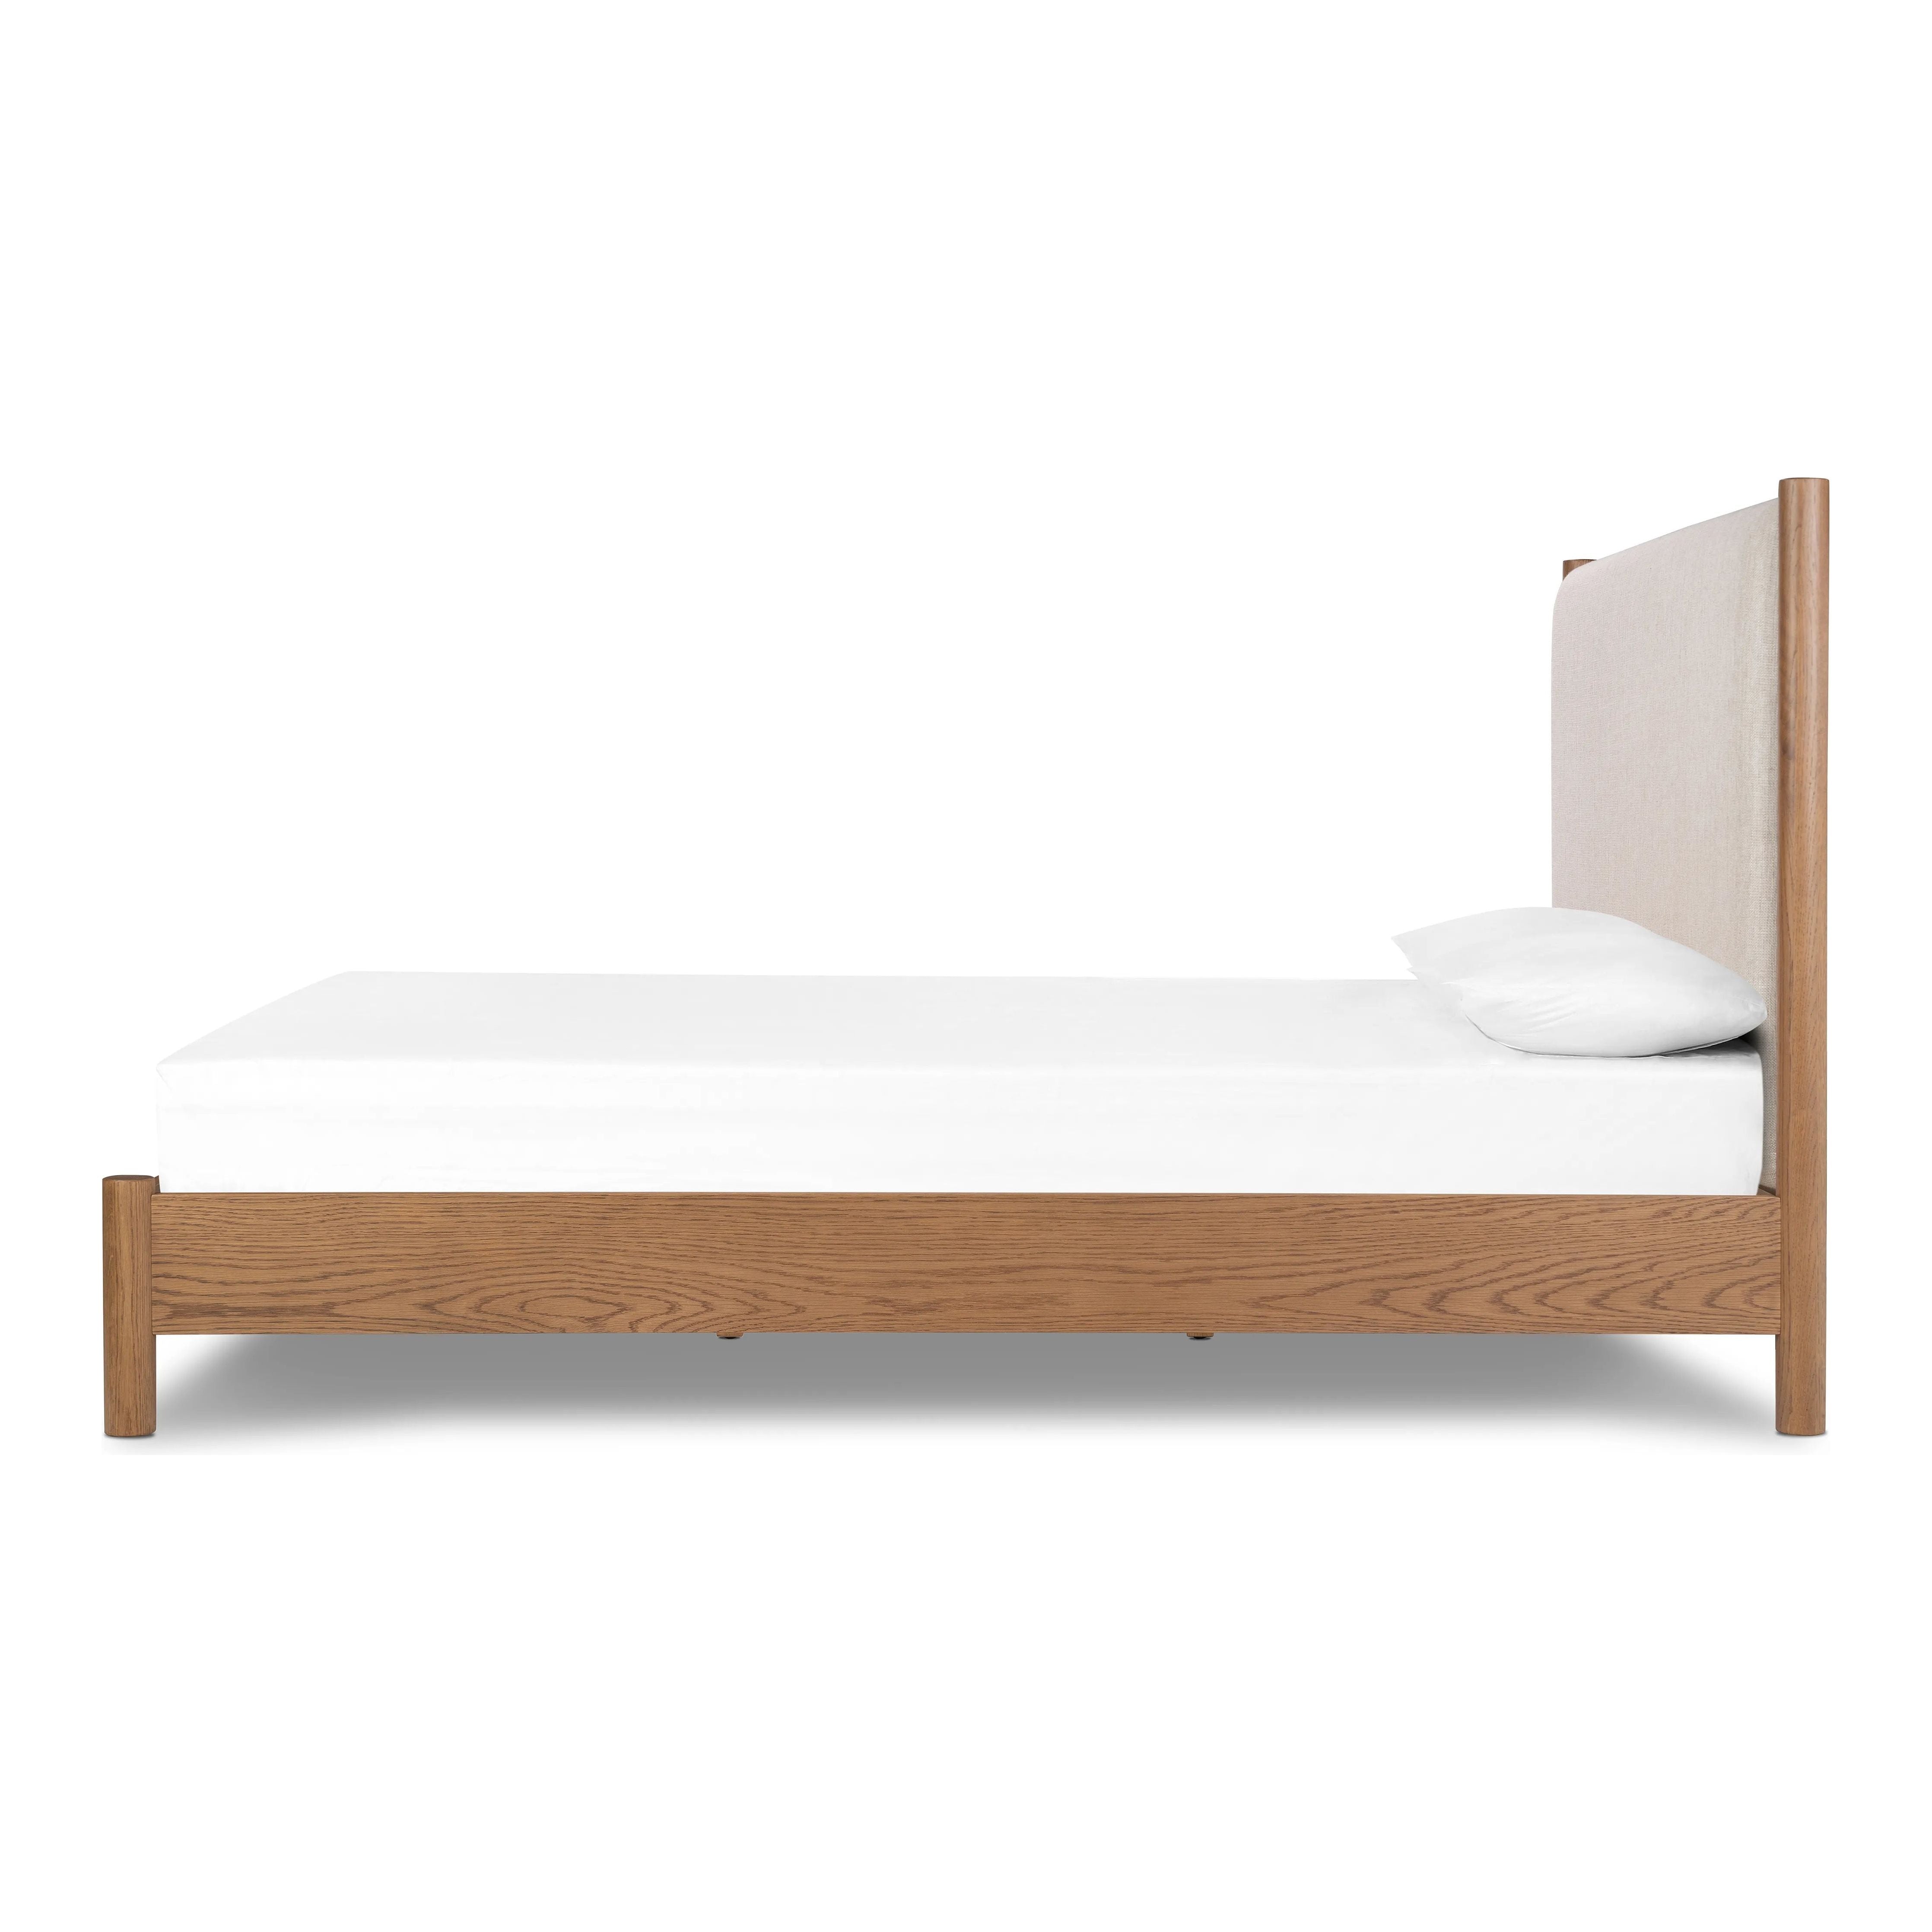 Rounded, chunky dowel legs in an amber oak finish frame the neutral, linen-like upholstered headboard of this bed frame.Collection: Bolto Amethyst Home provides interior design, new home construction design consulting, vintage area rugs, and lighting in the Portland metro area.